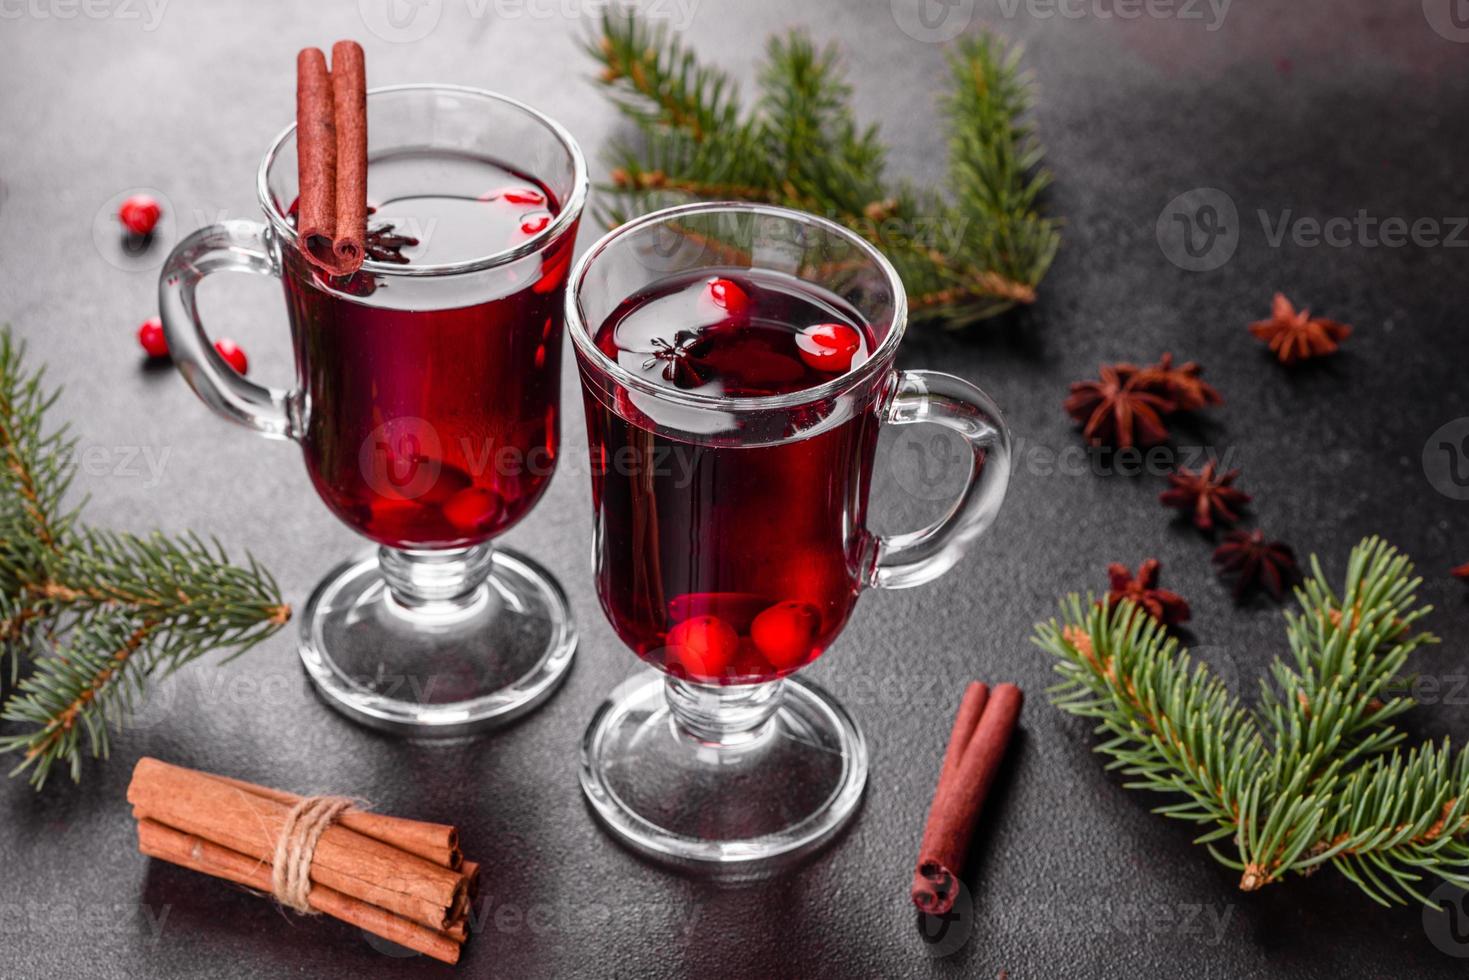 Hot mulled wine for winter and Christmas photo